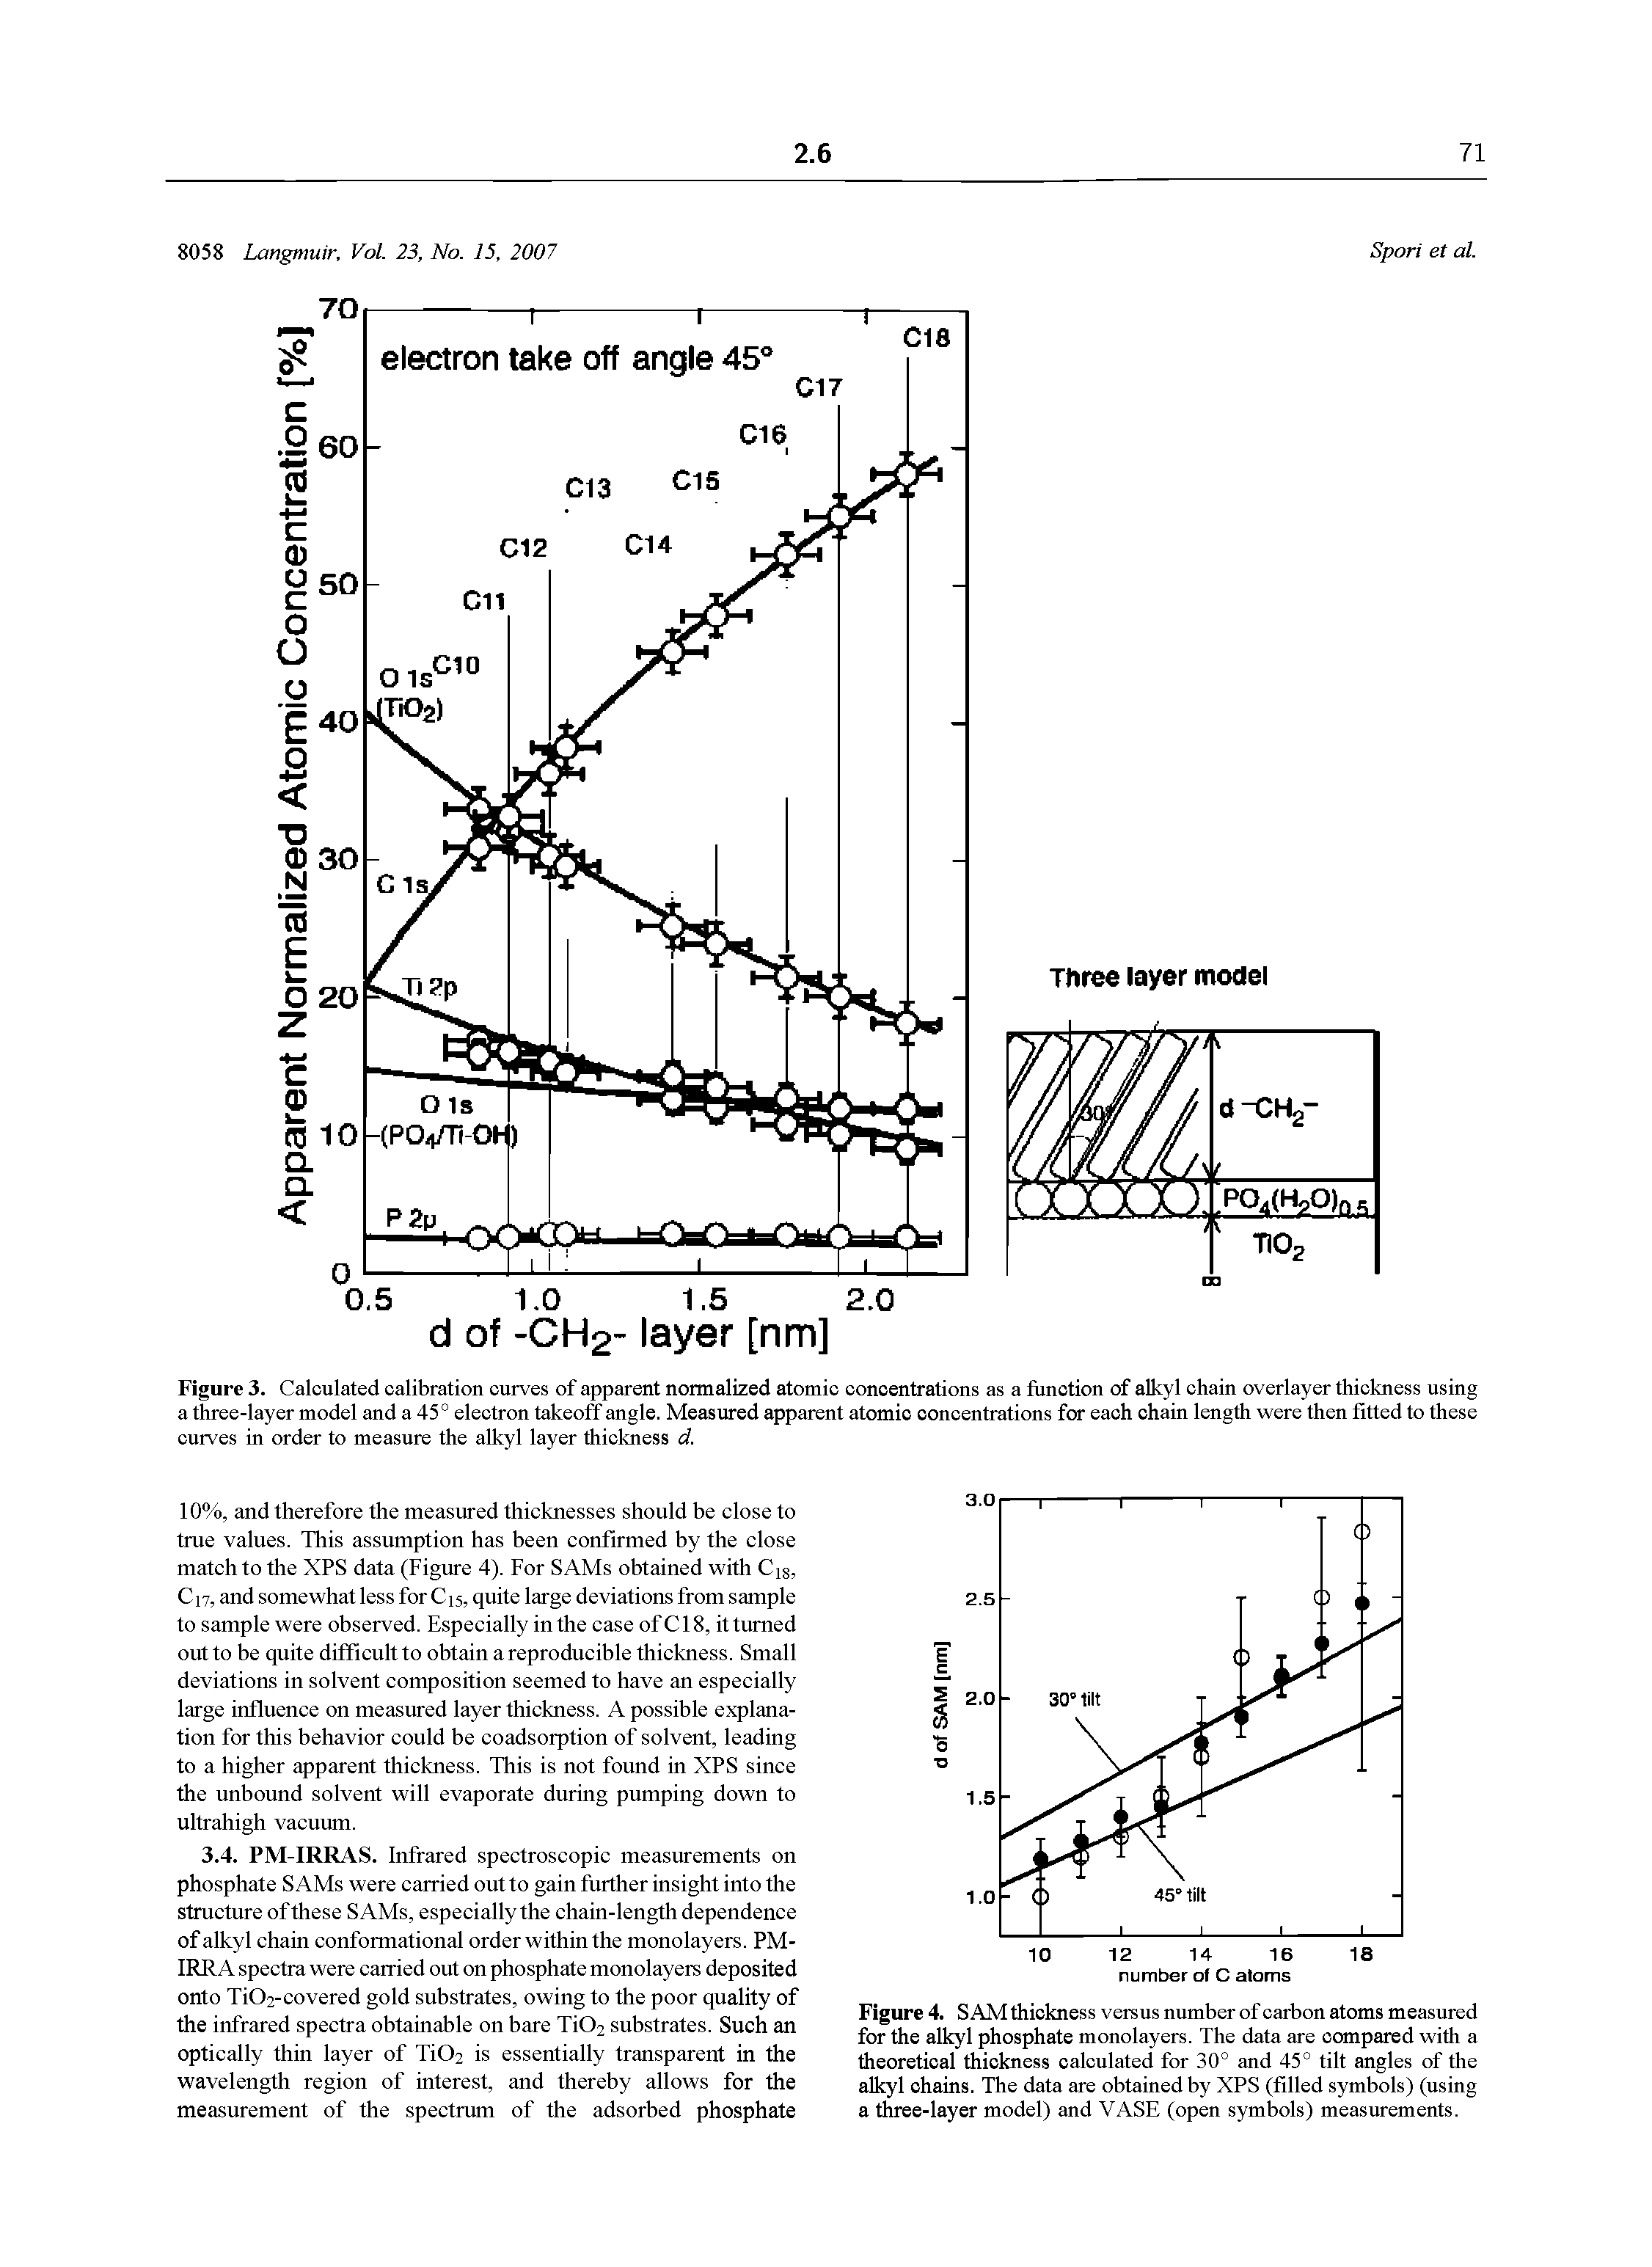 Figure 3. Calculated calibration curves of apparent normalized atomic concentrations as a function of alkyl chain overlayer thickness using a three-layer model and a 45° electron takeoff angle. Measured apparent atomic concentrations for each chain length were then fitted to these curves in order to measure the alkyl layer thickness d...